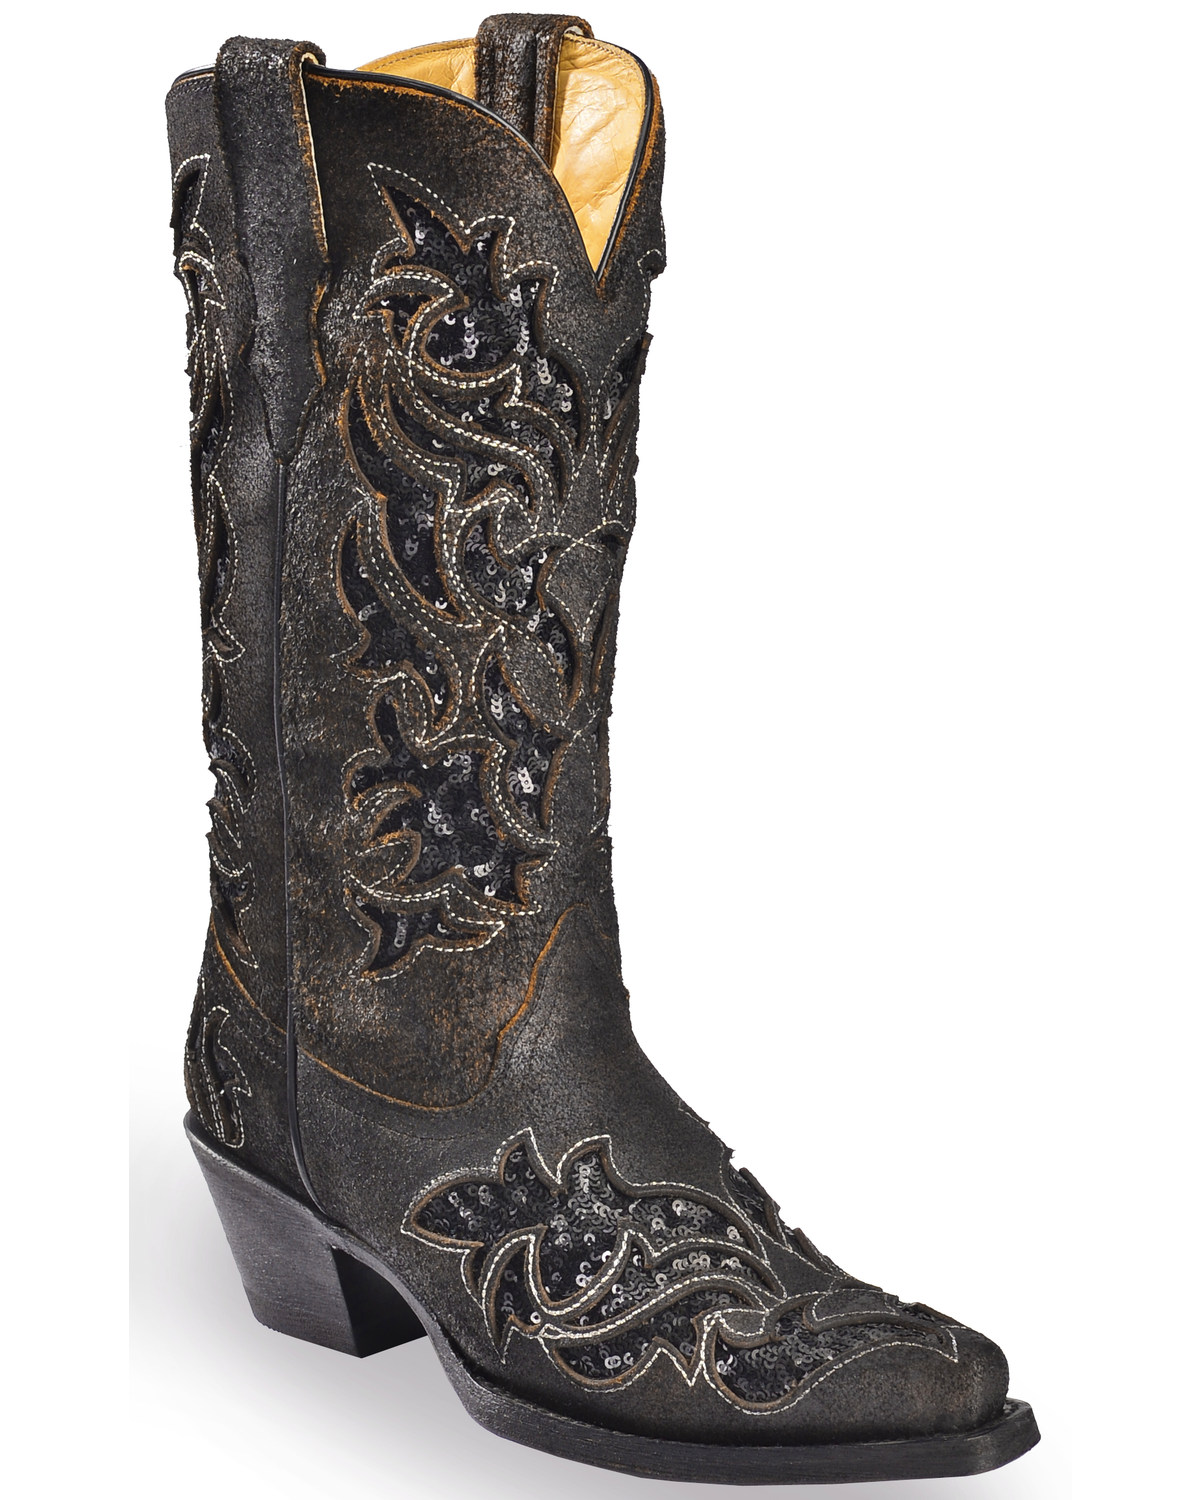 Corral Boots Women's Sequin Inlay 